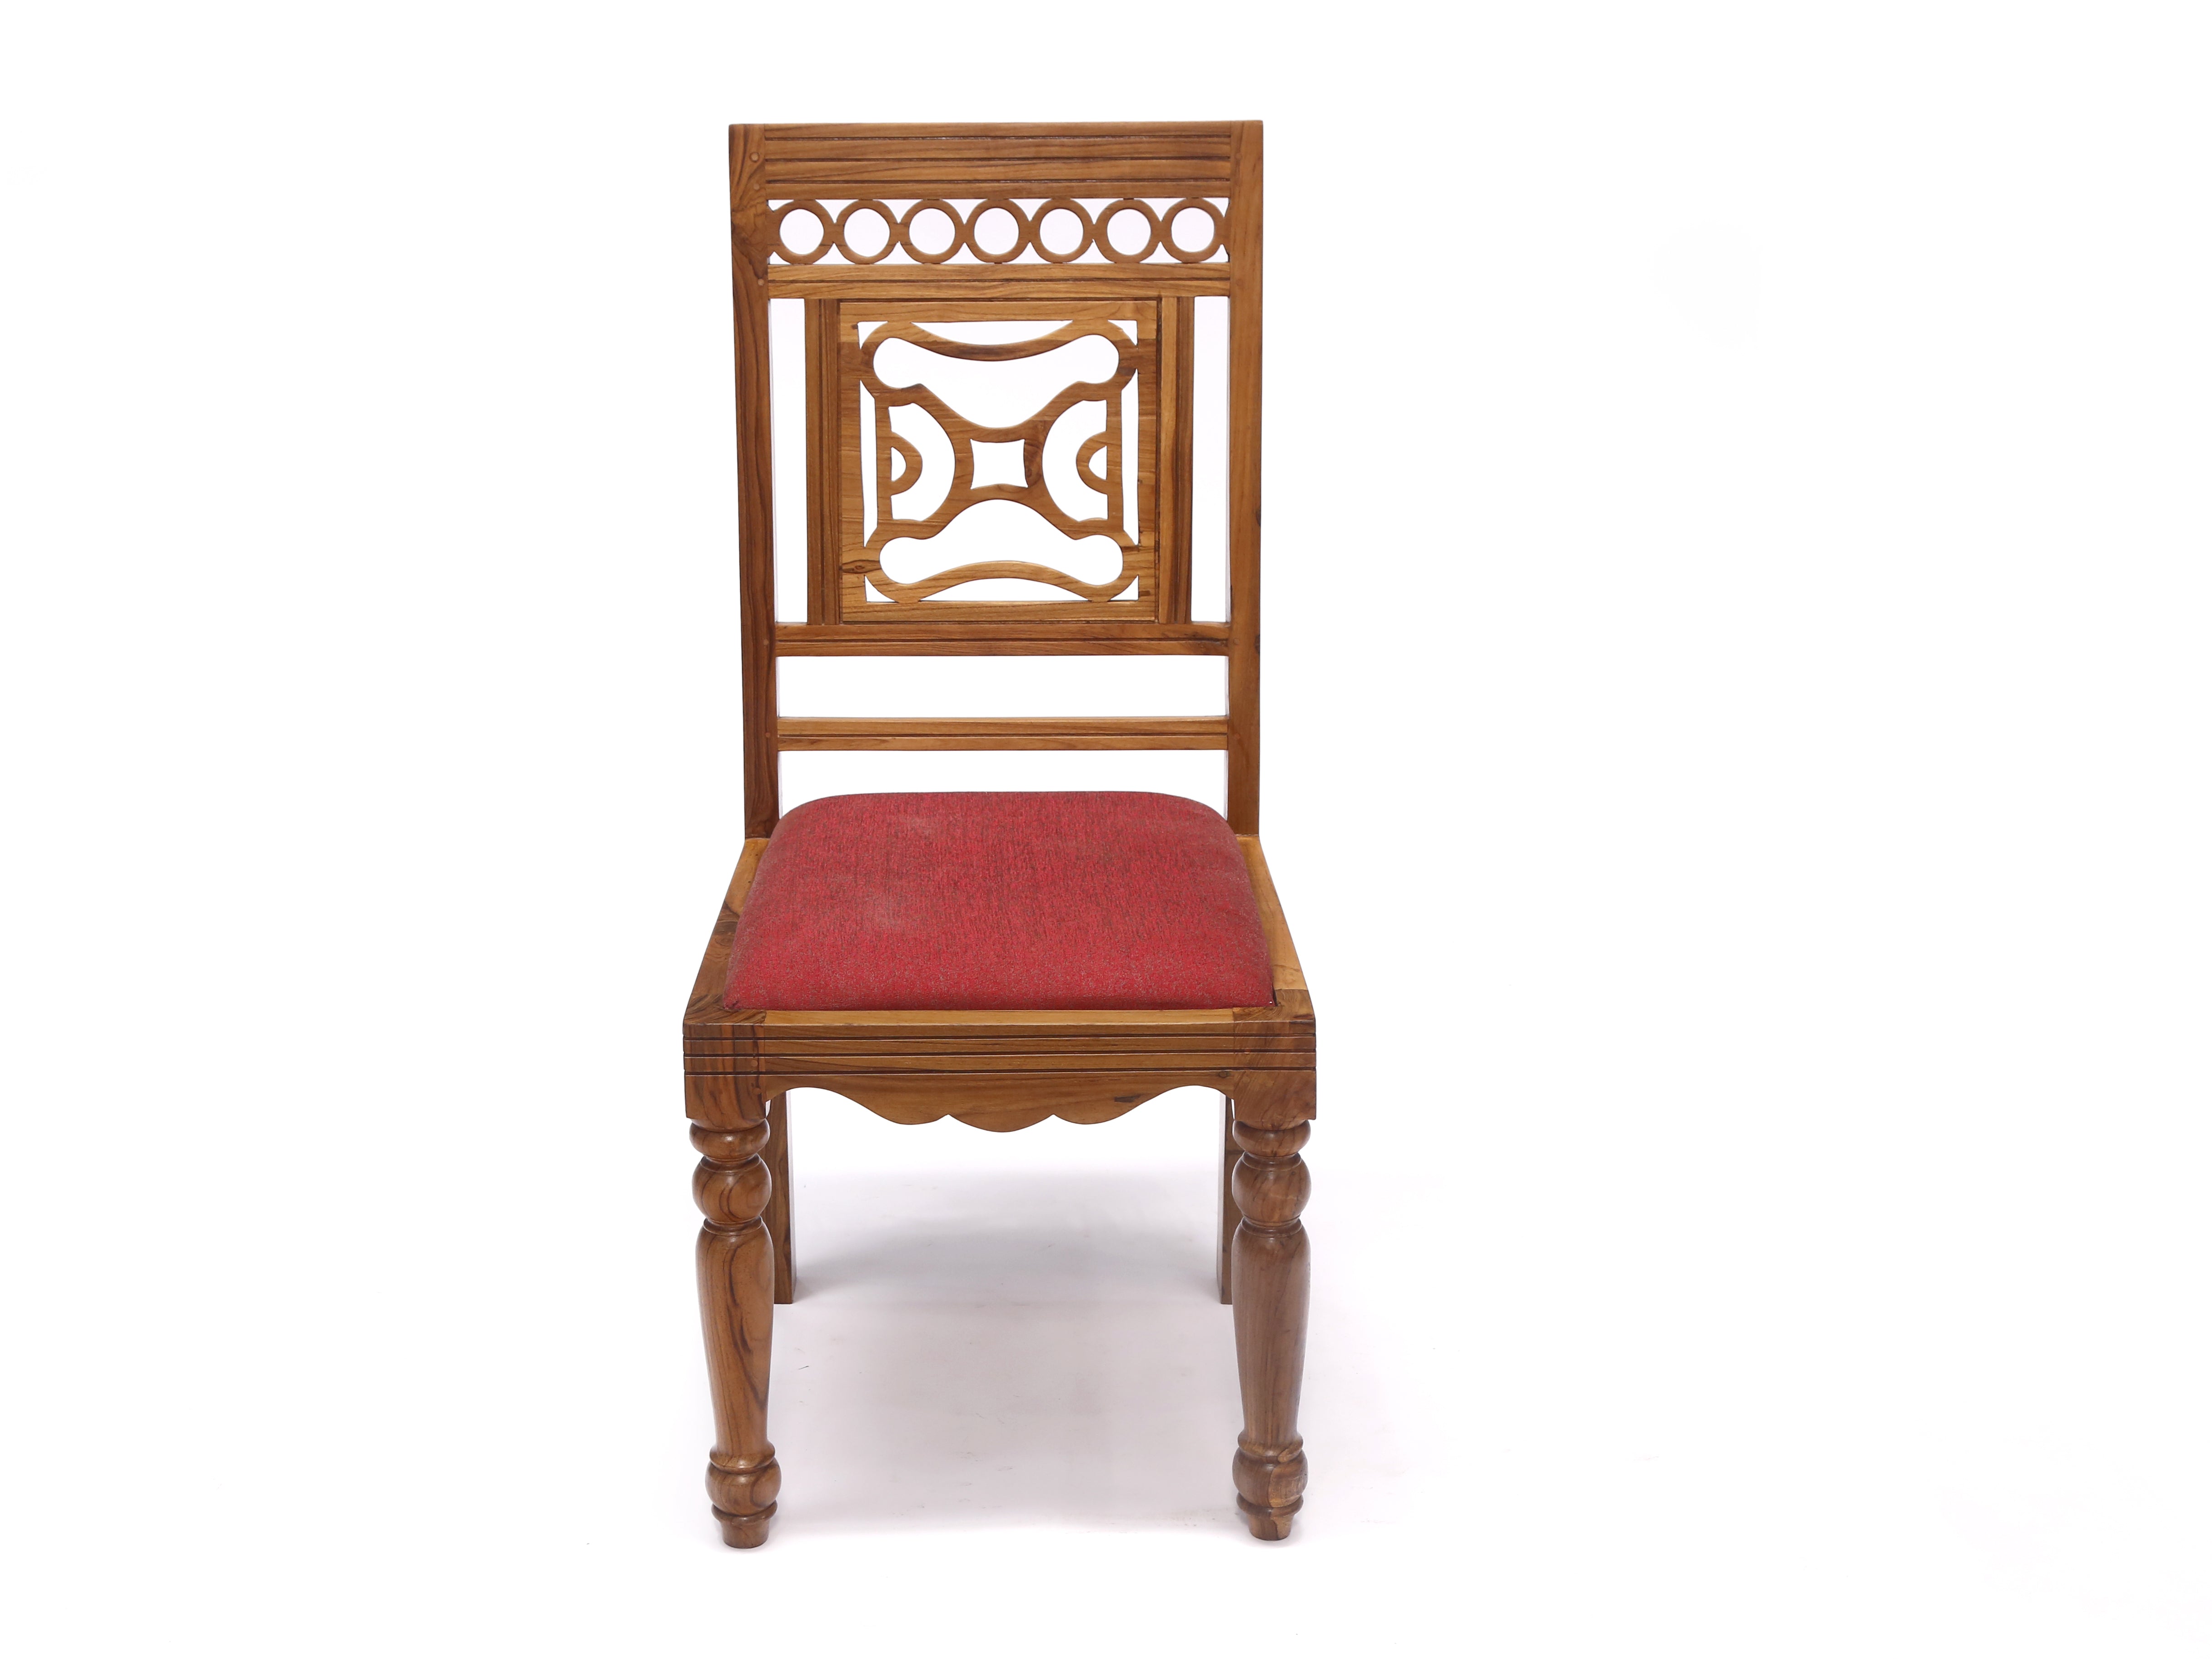 (Set of 2) Teak Wood Traditional Dinning office all purpose Chair red color Dining Chair